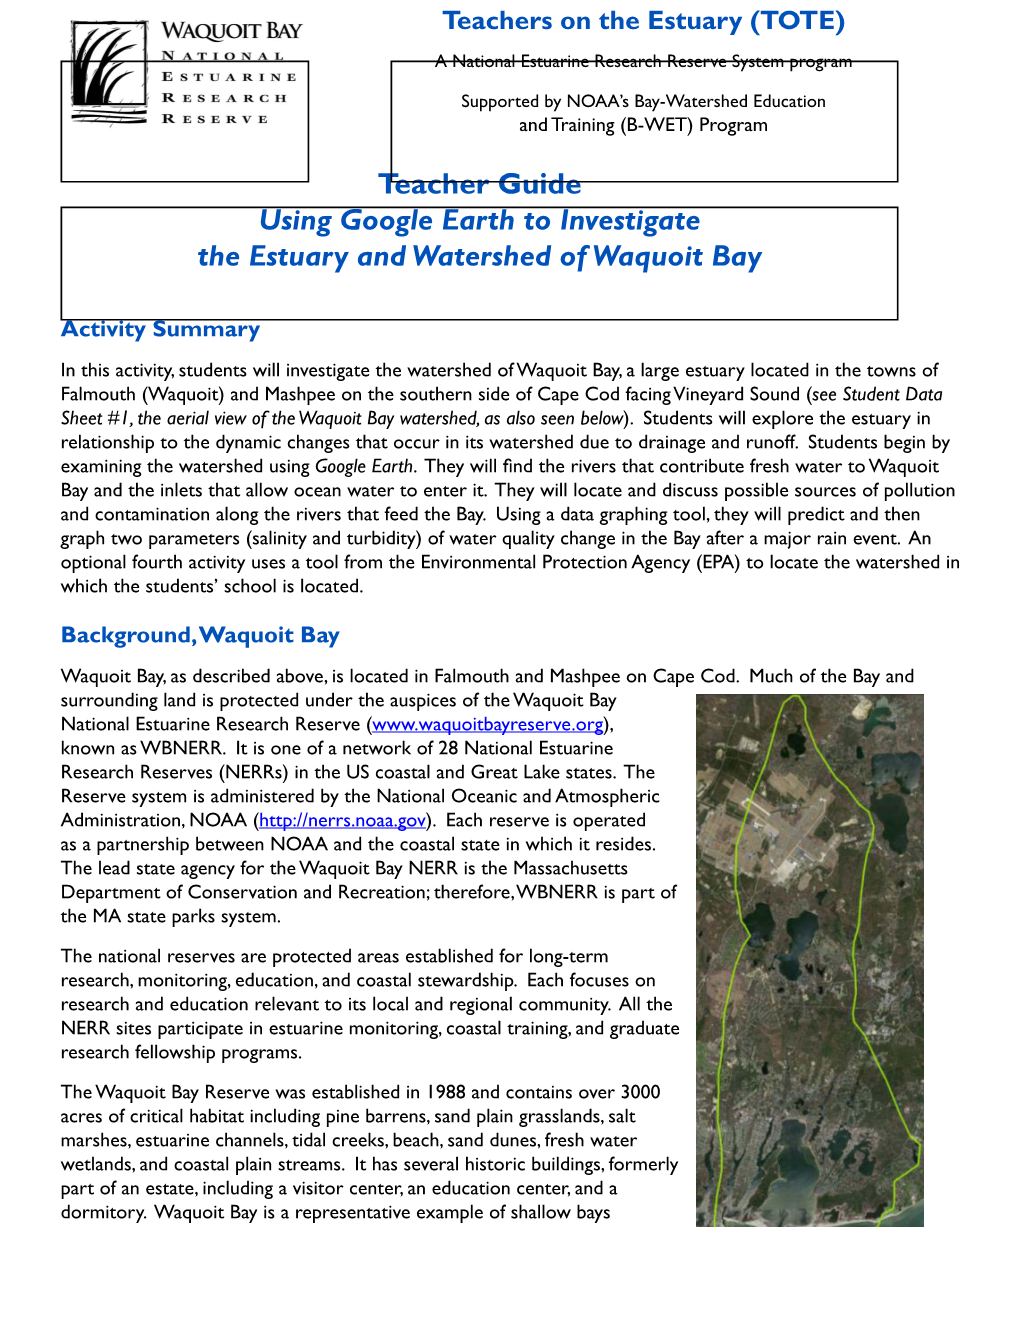 Teacher Guide Using Google Earth to Investigate the Estuary and Watershed of Waquoit Bay